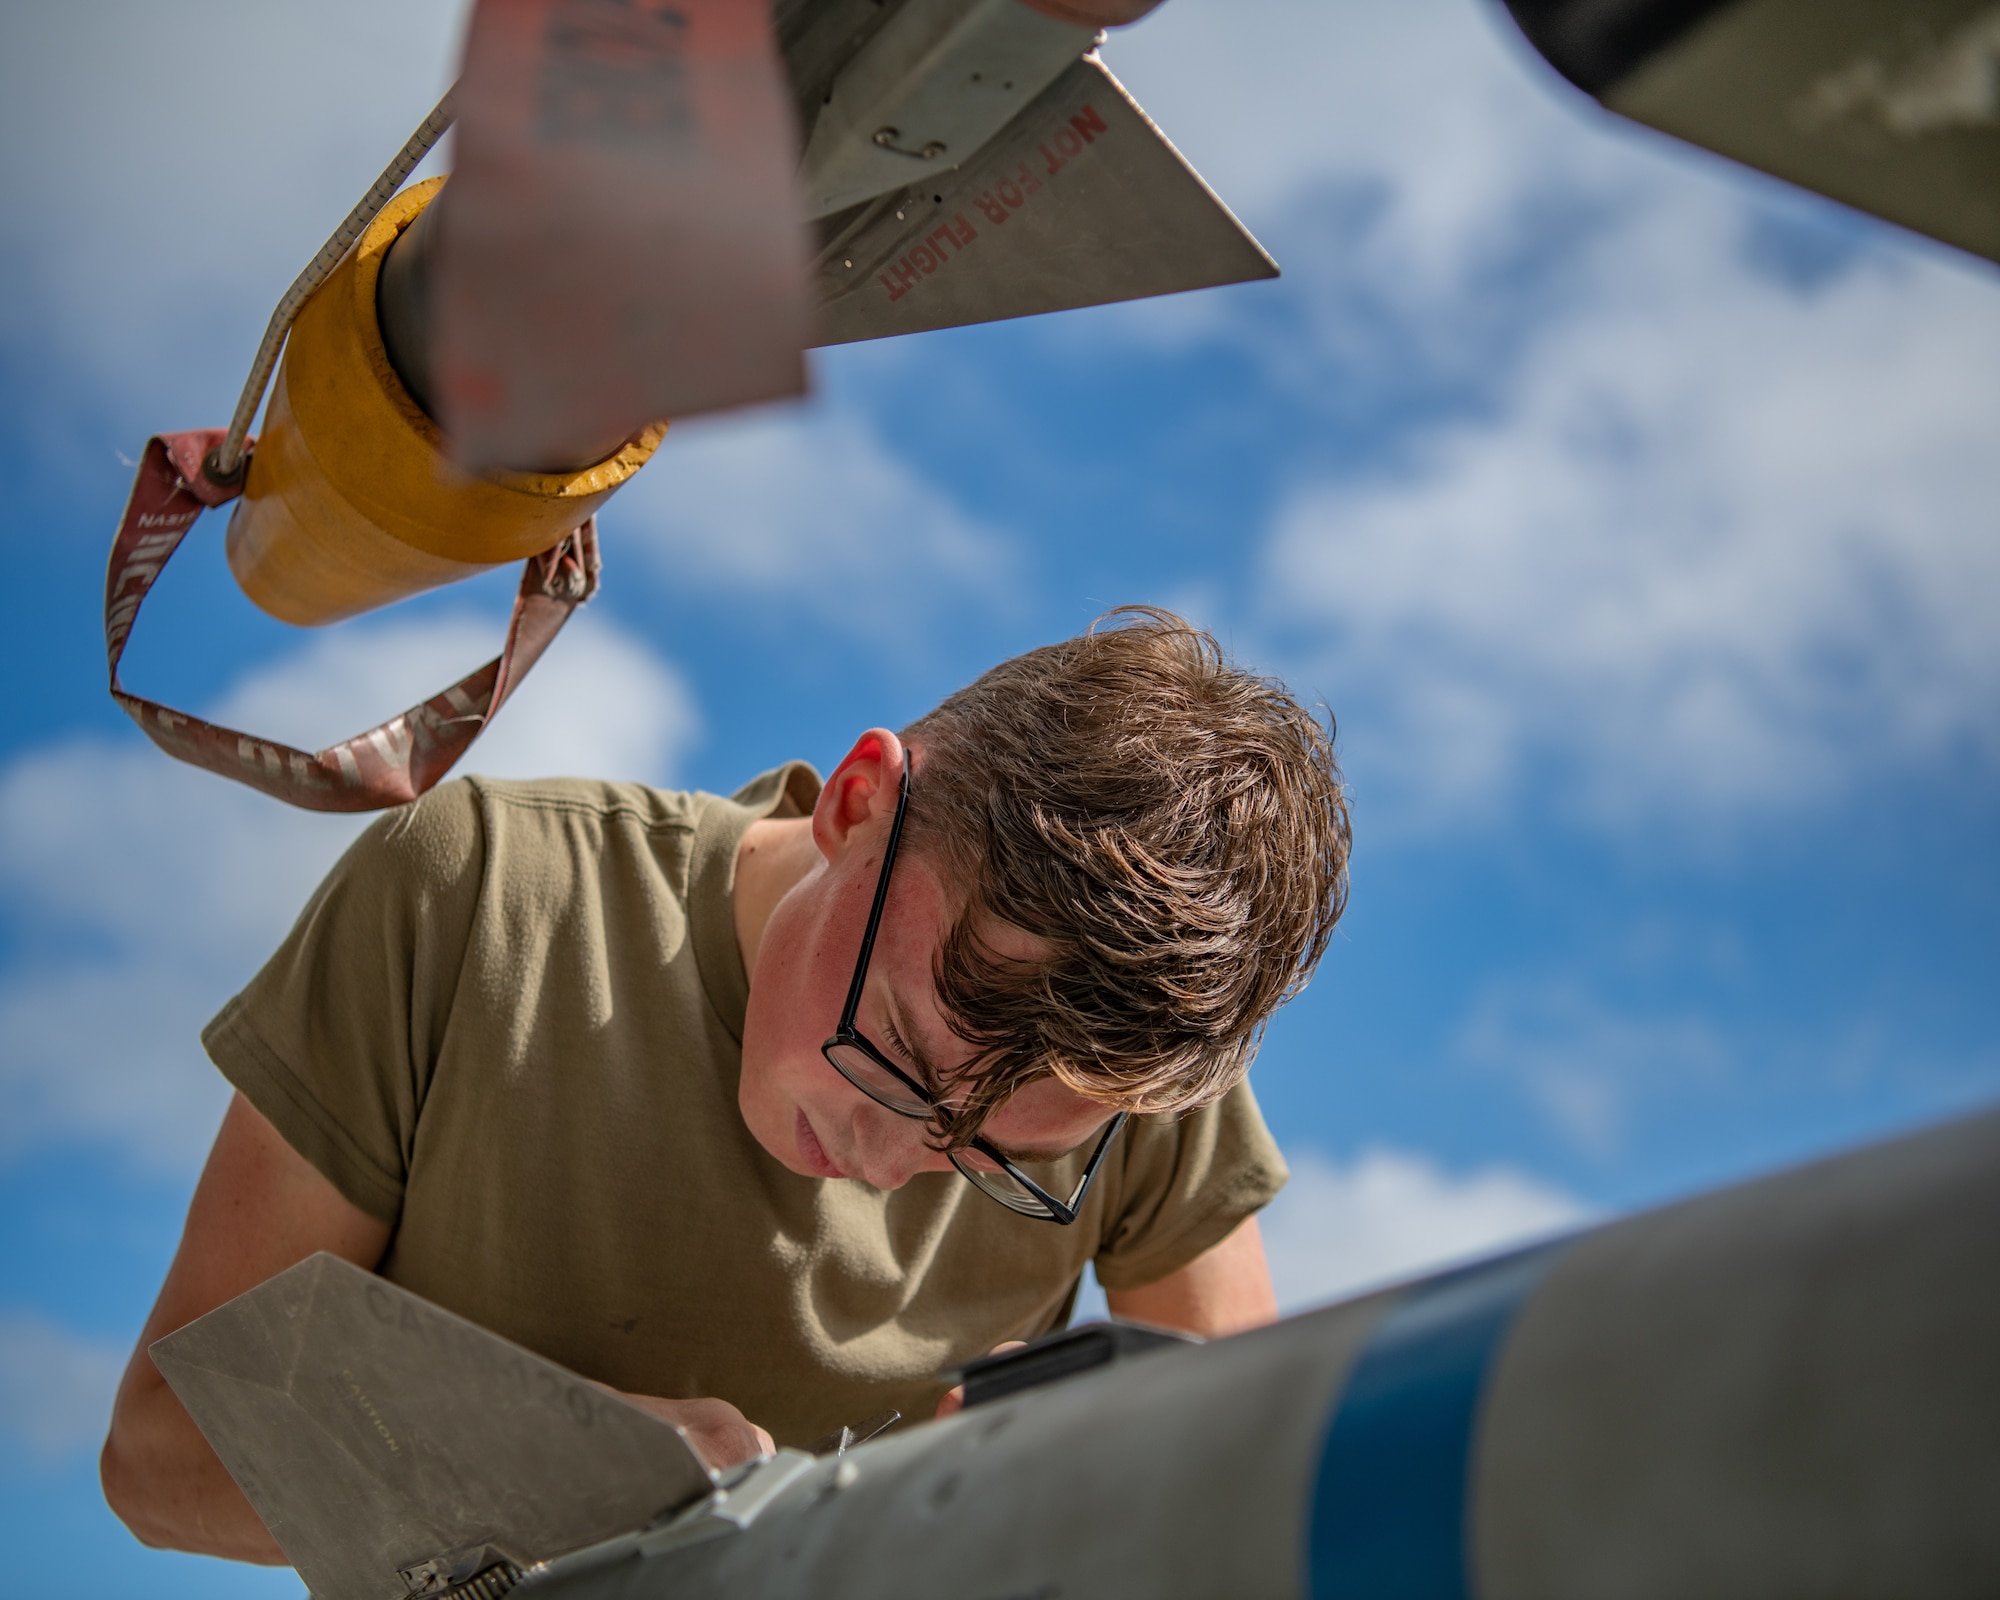 An Airman installs wings on a missile